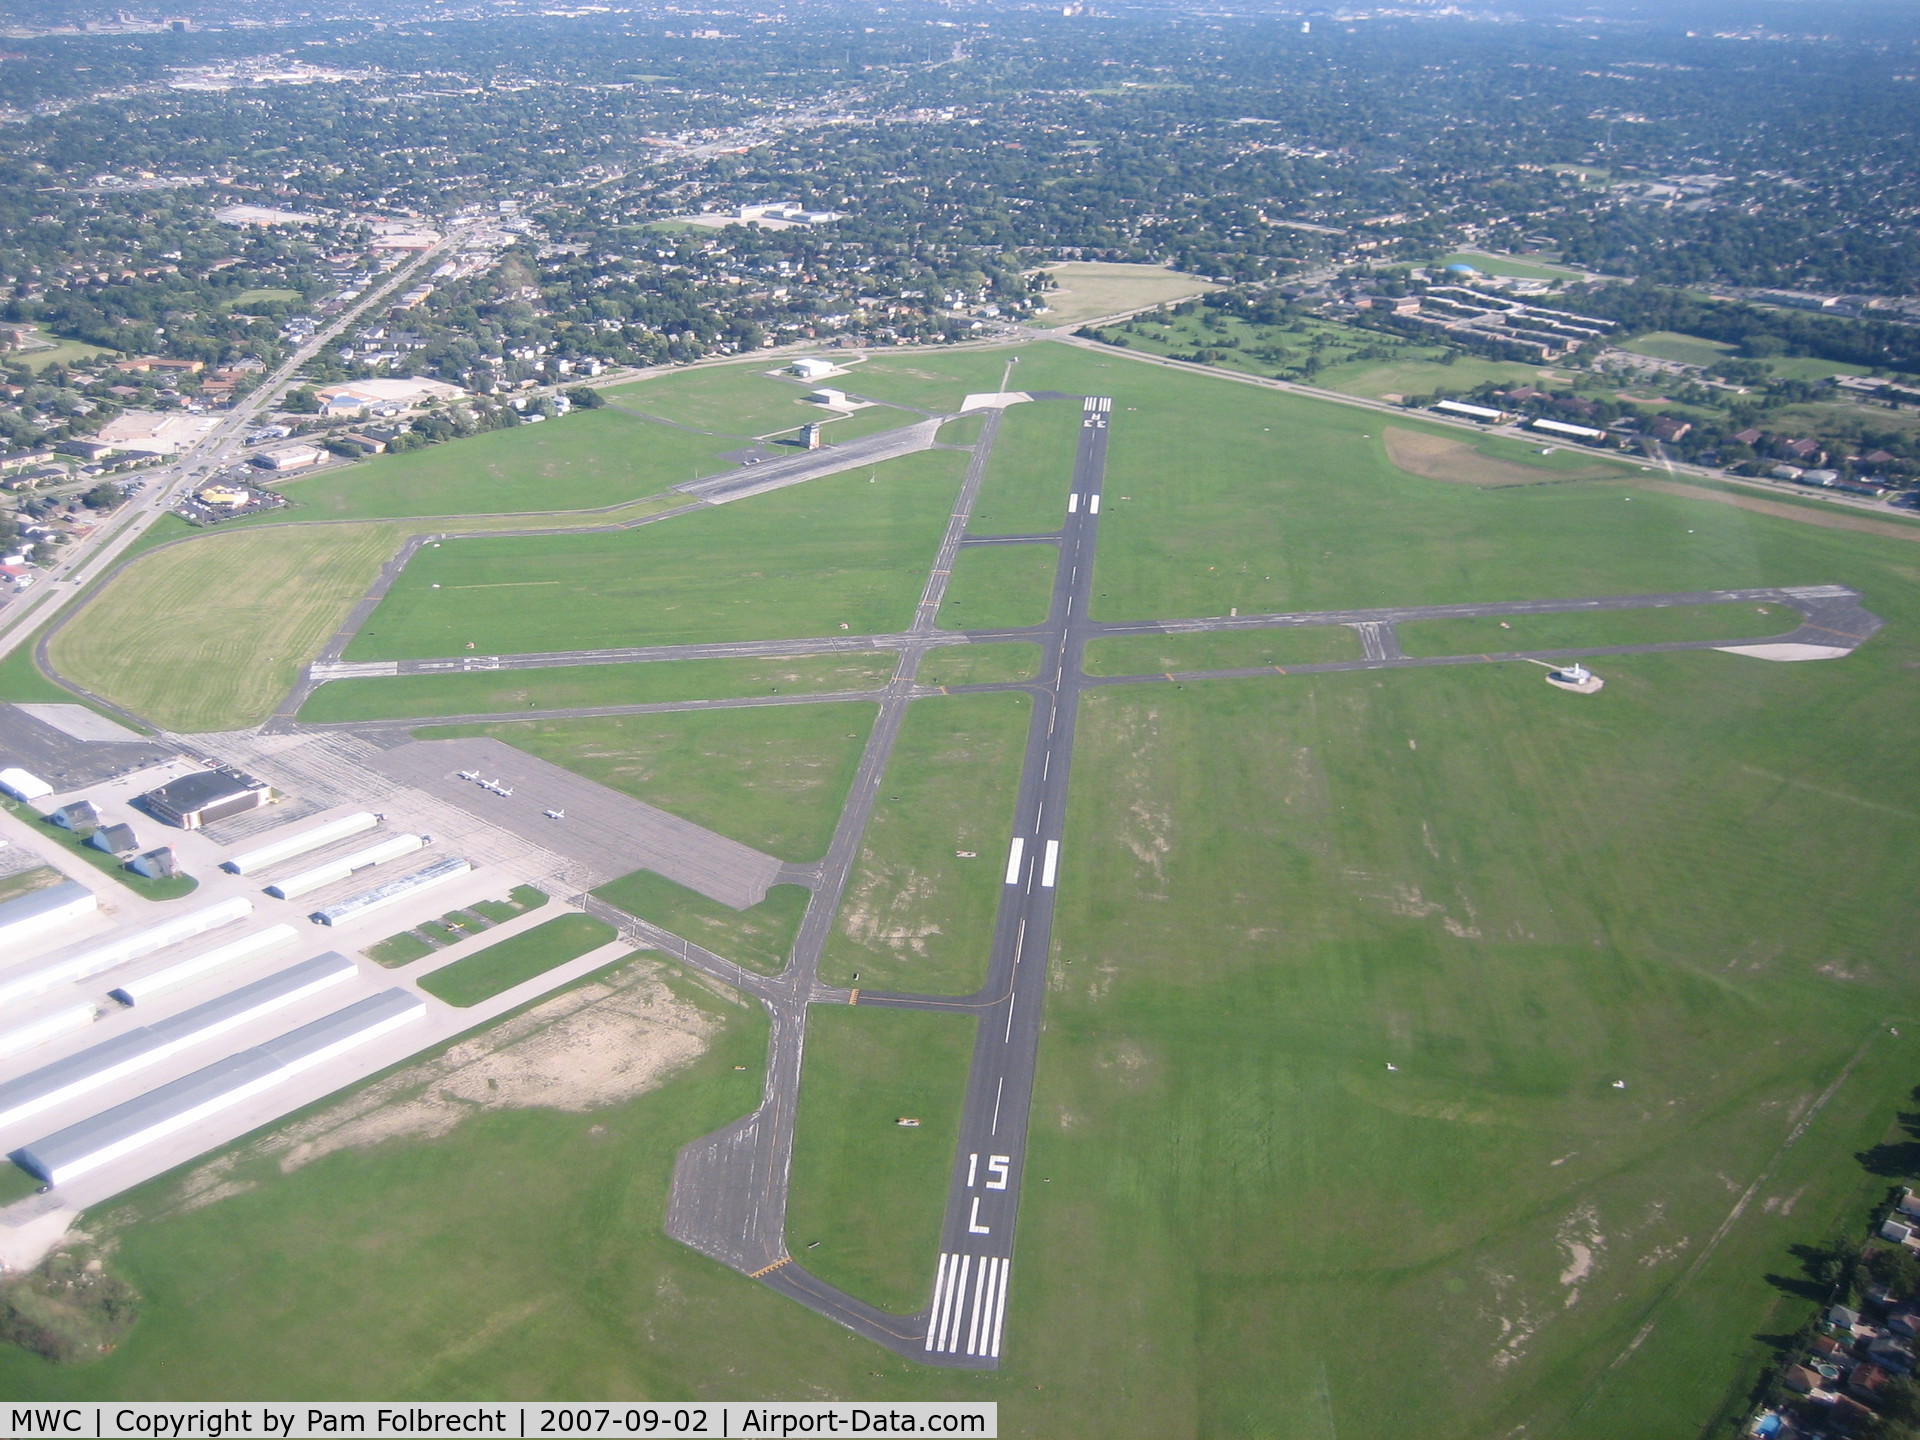 Lawrence J Timmerman Airport (MWC) - The Field